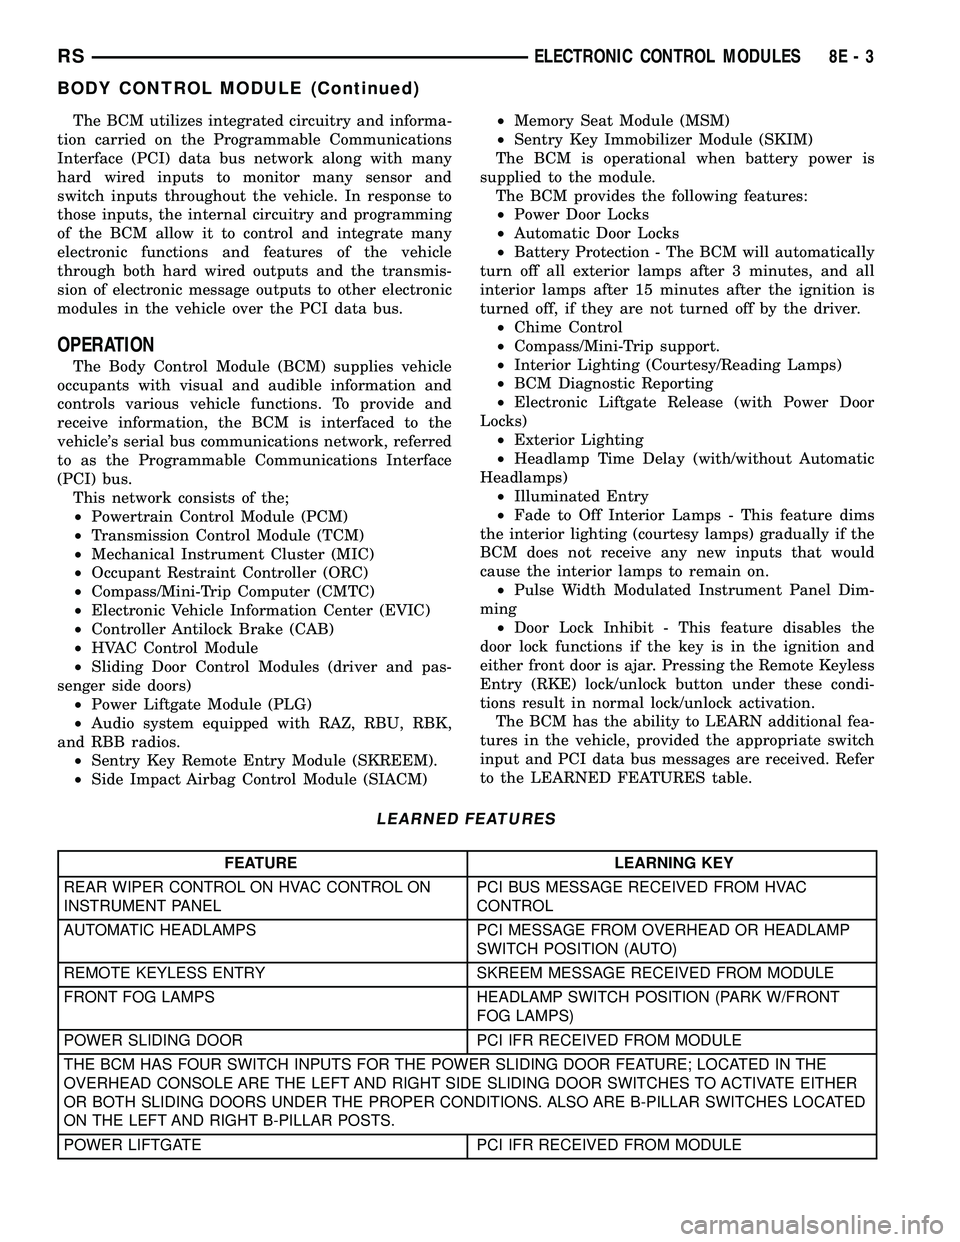 CHRYSLER VOYAGER 2005  Service Manual The BCM utilizes integrated circuitry and informa-
tion carried on the Programmable Communications
Interface (PCI) data bus network along with many
hard wired inputs to monitor many sensor and
switch 